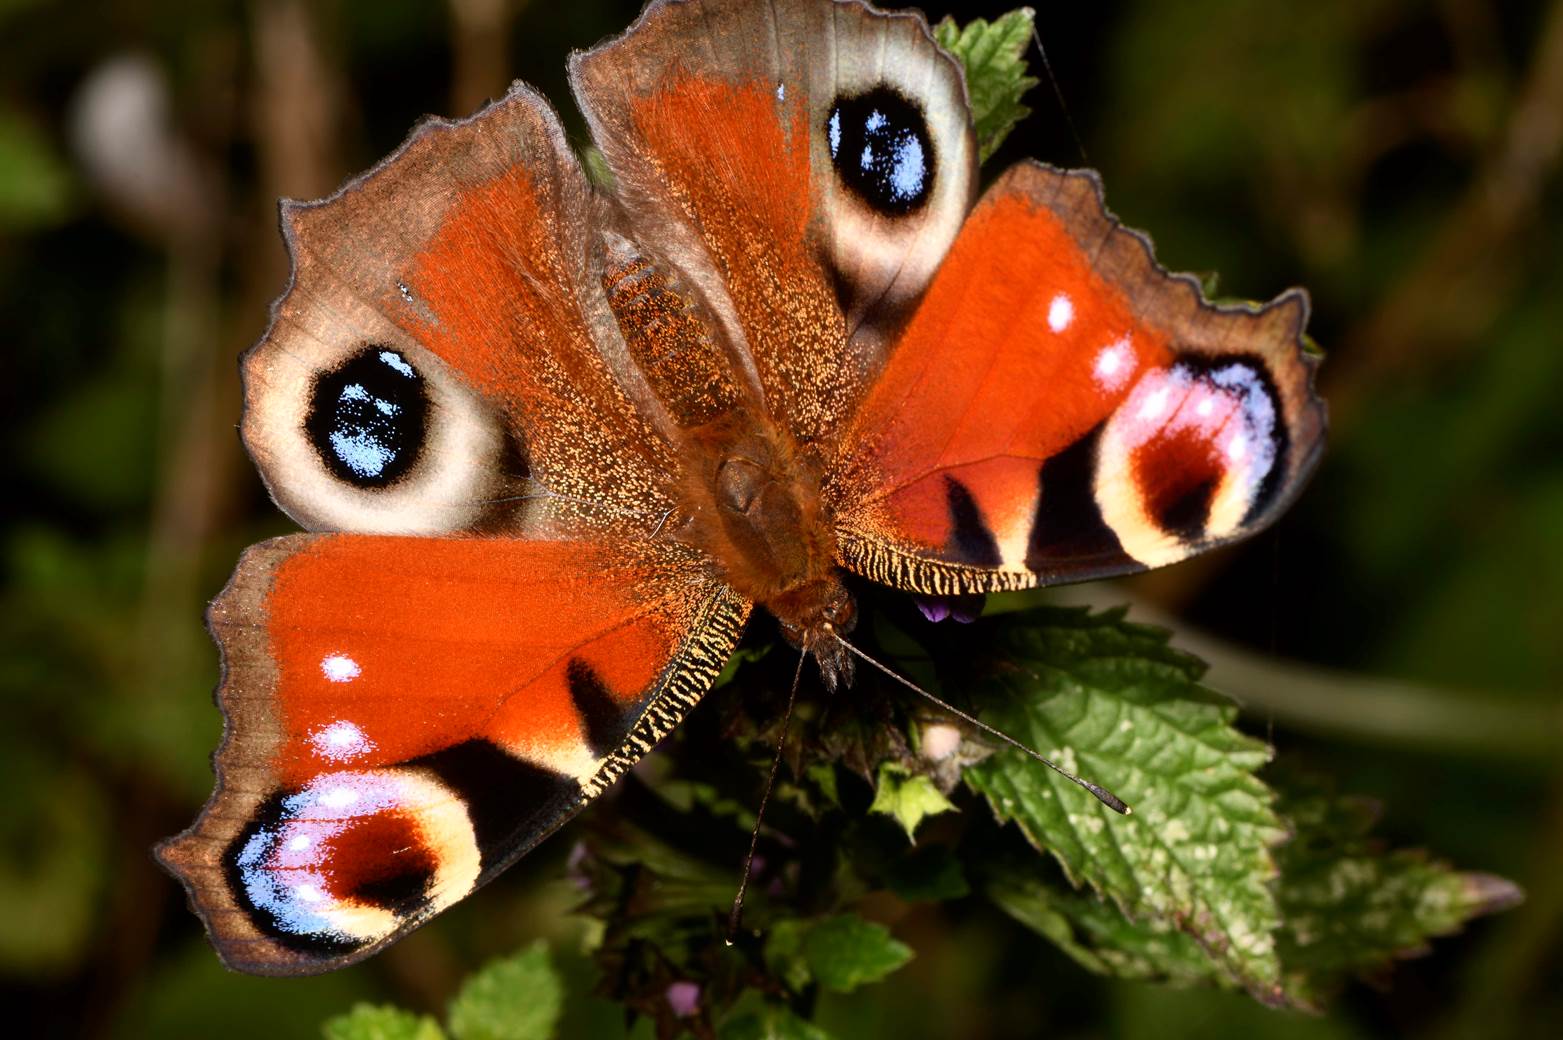 A close up of a butterfly

Description automatically generated with low confidence